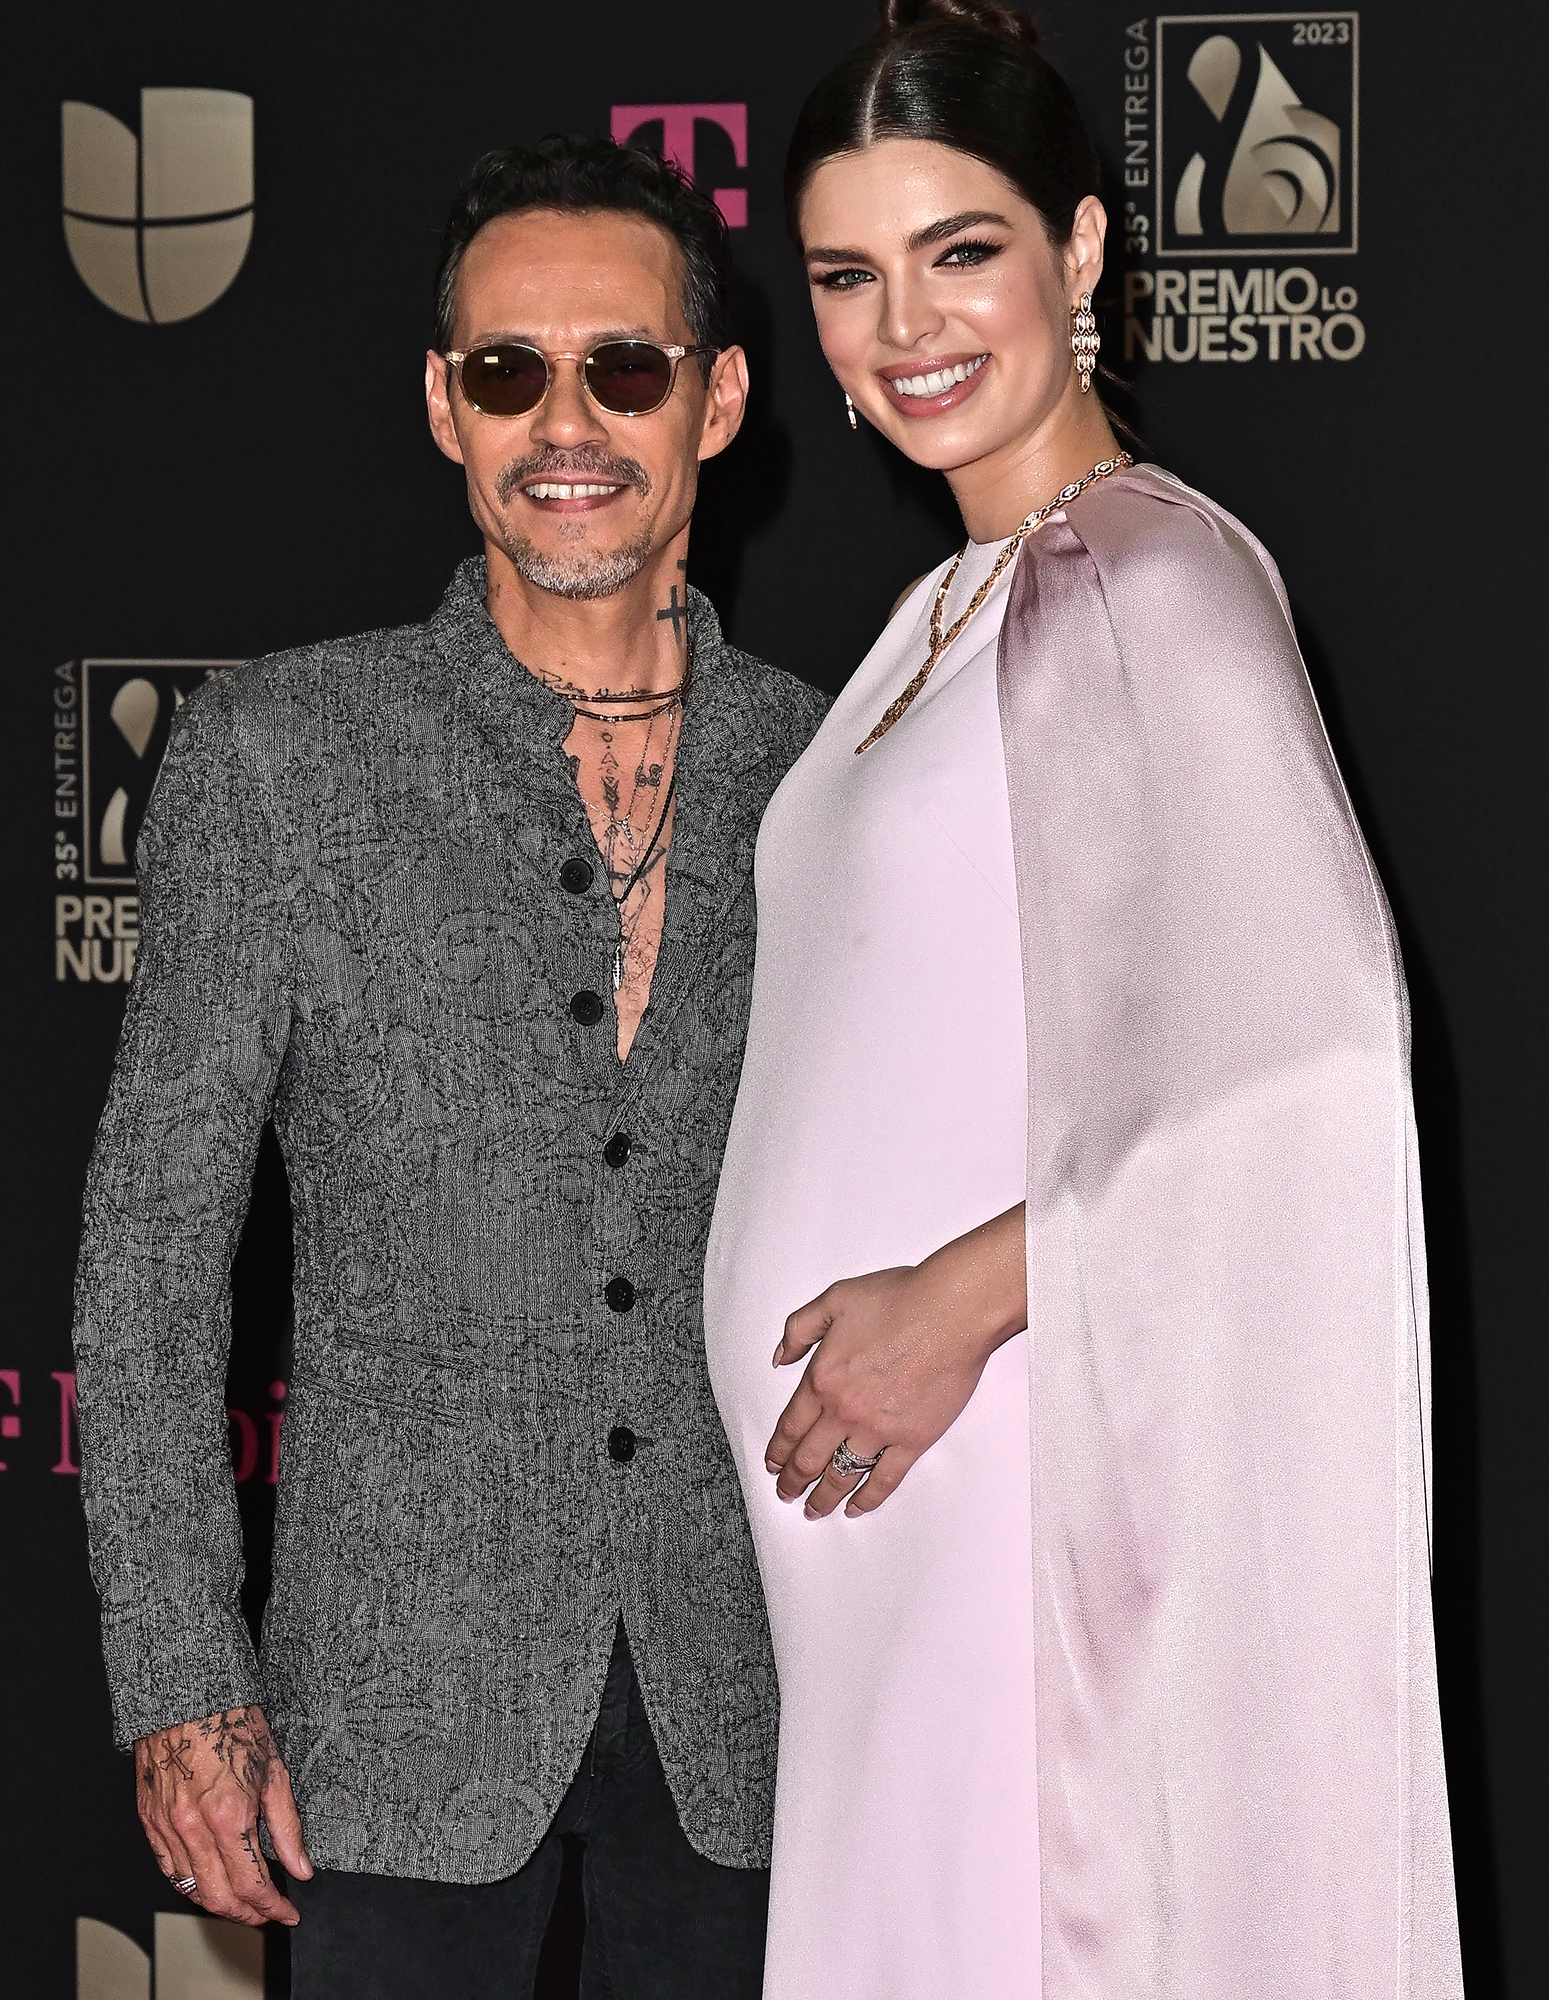 Marc Anthony 'Never 'Imagined He'd Become a Father Again' Until Meeting Nadia Ferreira